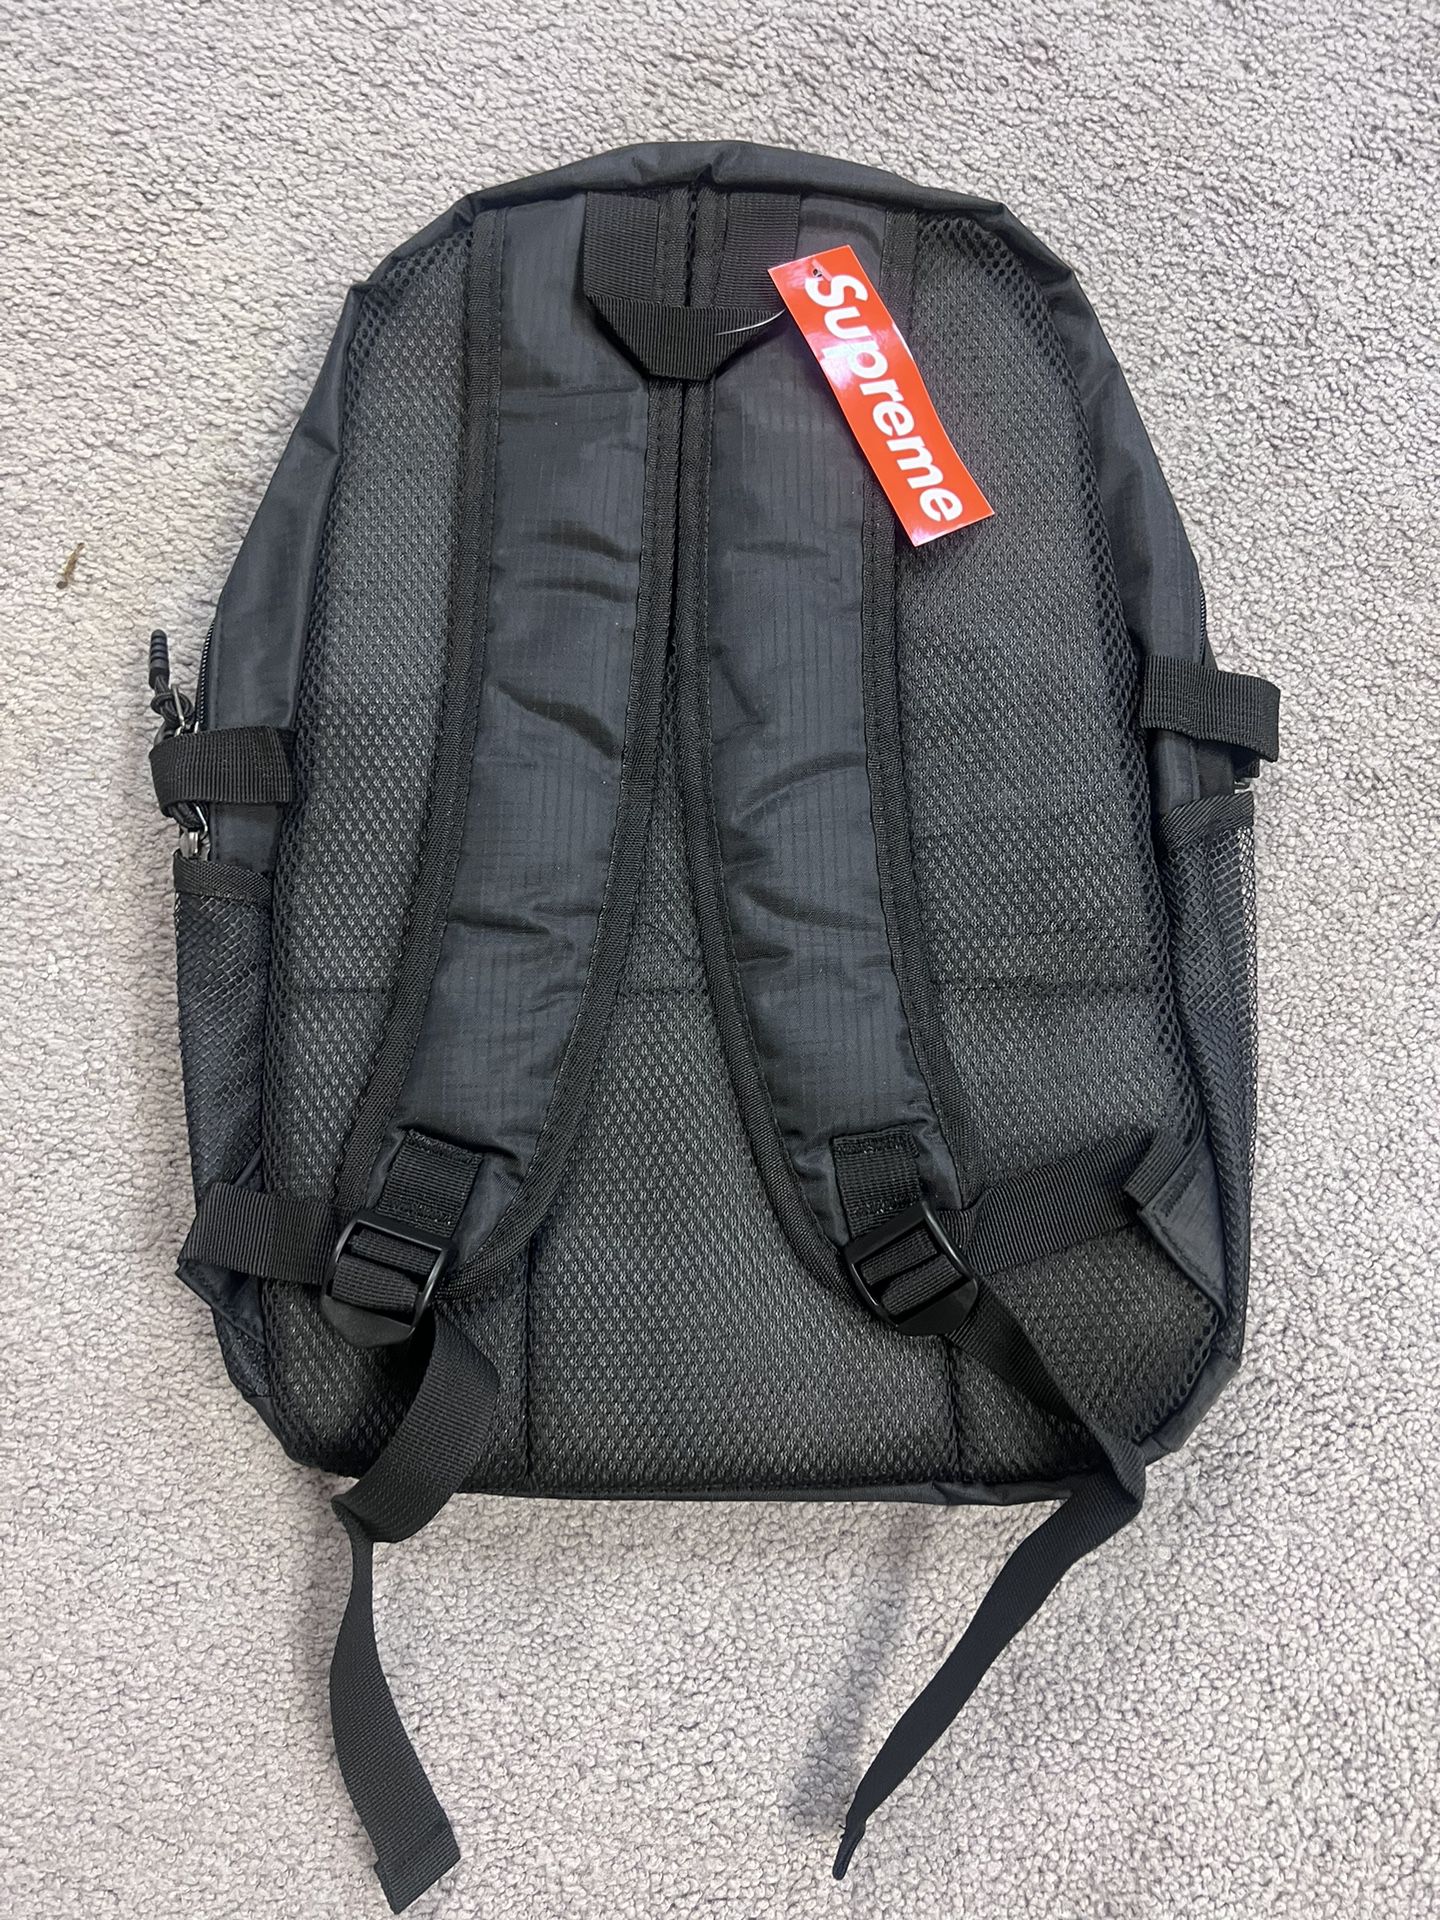 Supreme Waist Bag SS18 for Sale in Cleveland, OH - OfferUp